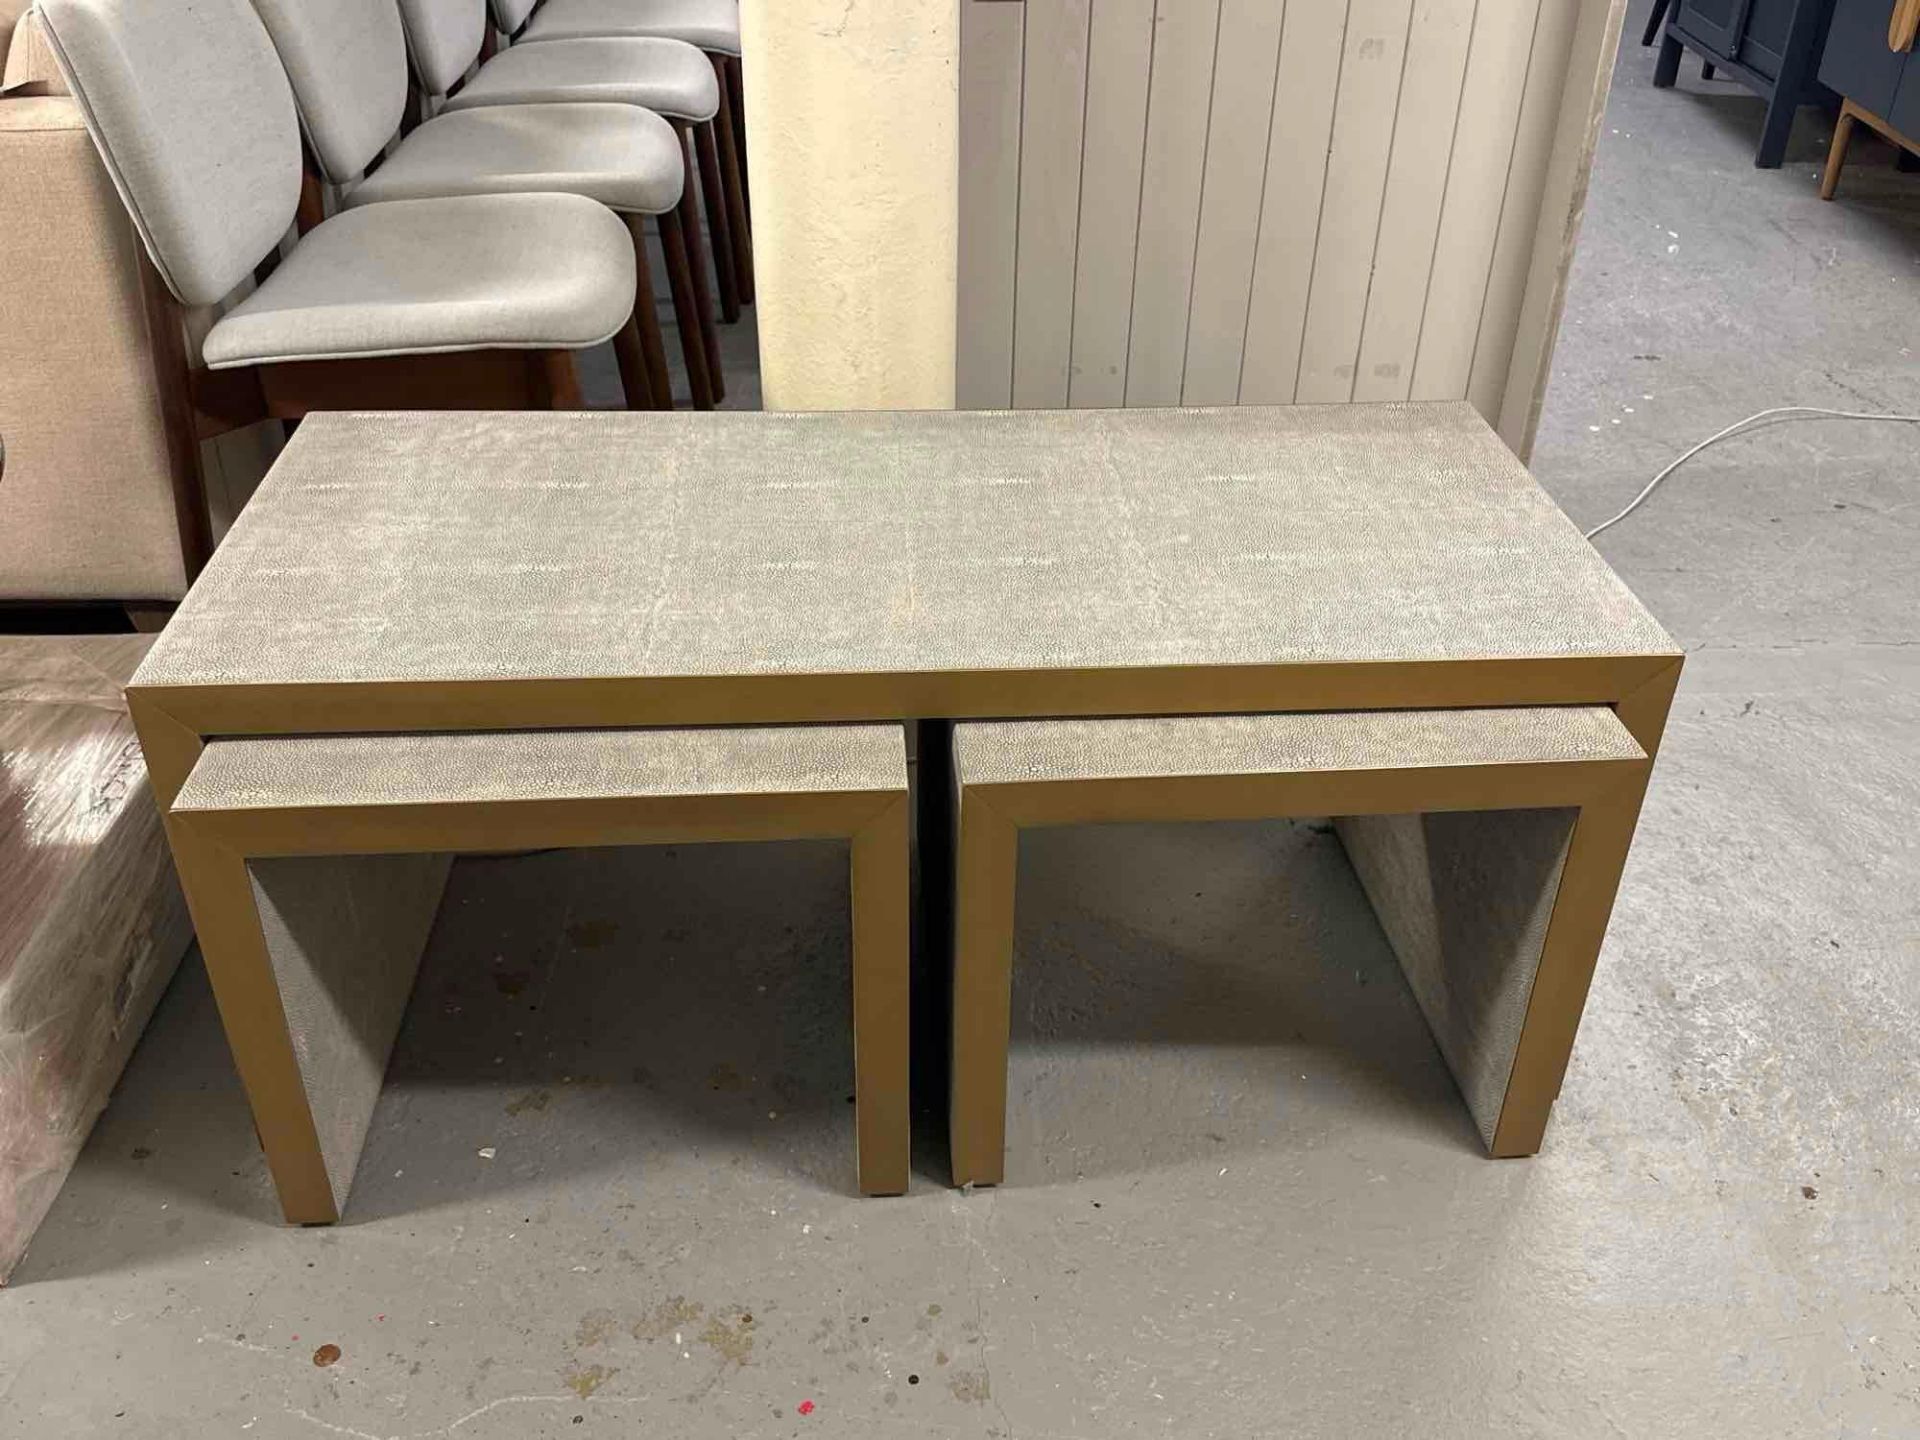 Holborn Nest of Tables A Set Of 3 Tables Covered In Faux Shagreen With Brass Finish Accents. This - Bild 2 aus 5